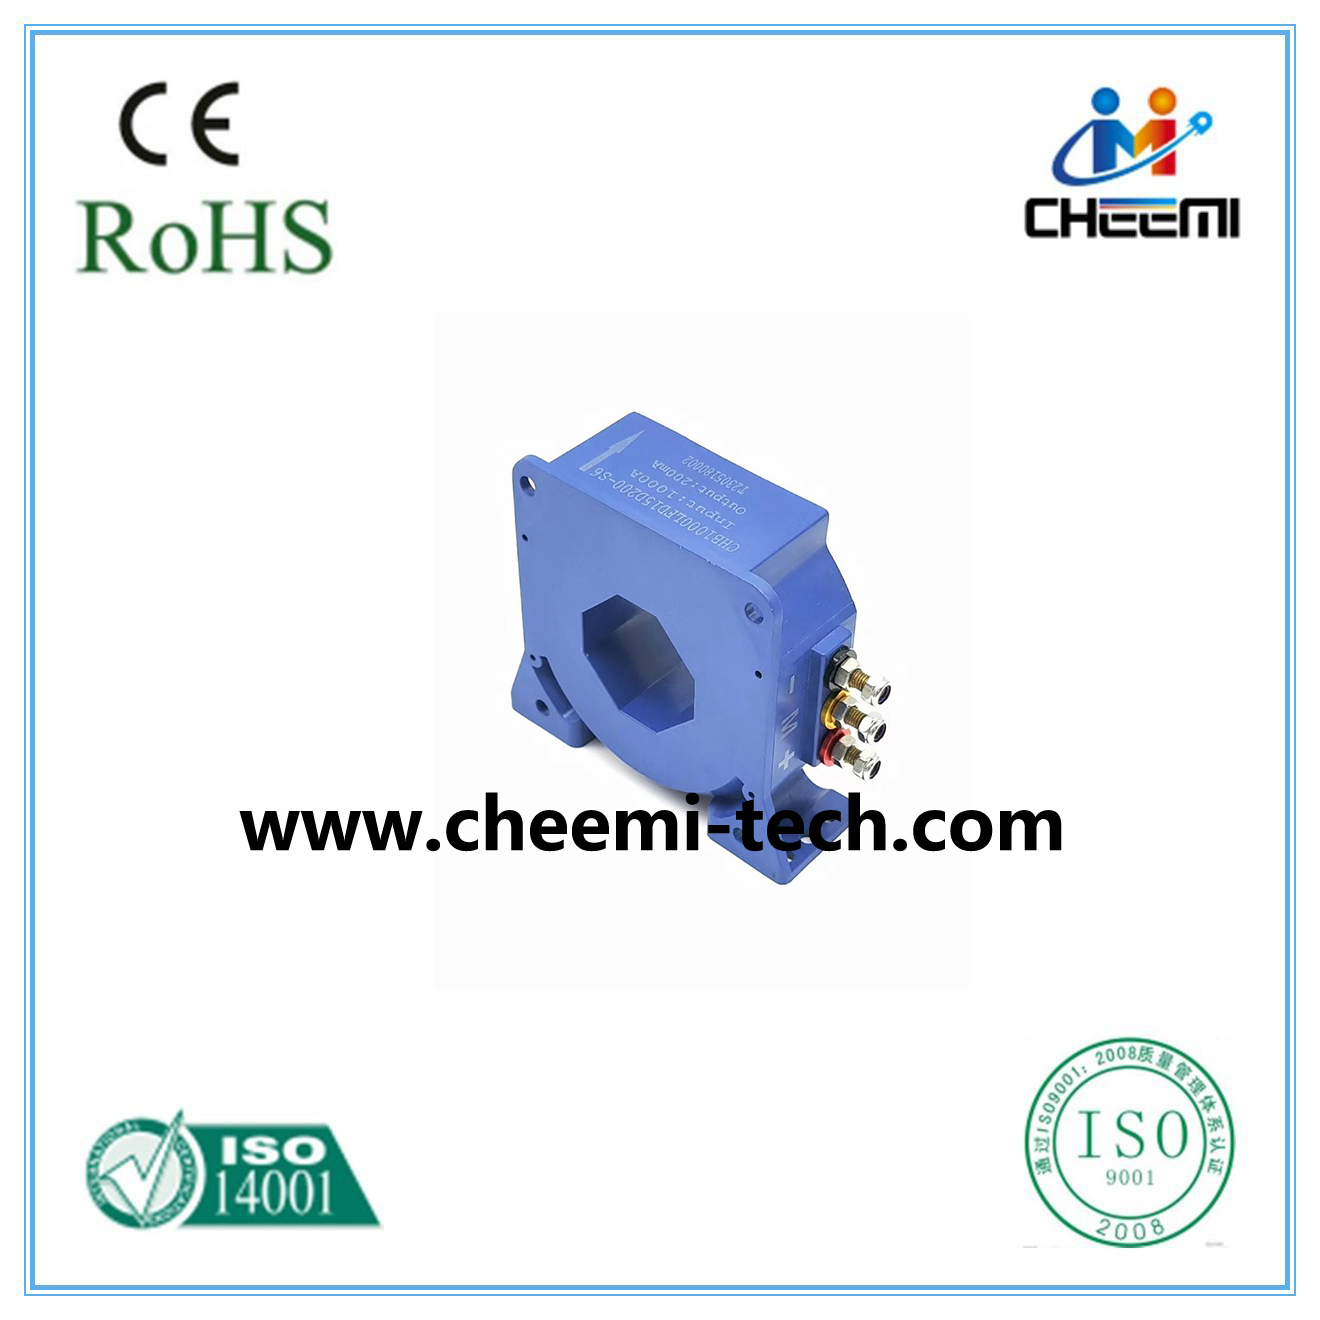 High-Accuracy-Current-Sensors-CHB1000LFD15D200-S6T2-Applied-In-railway